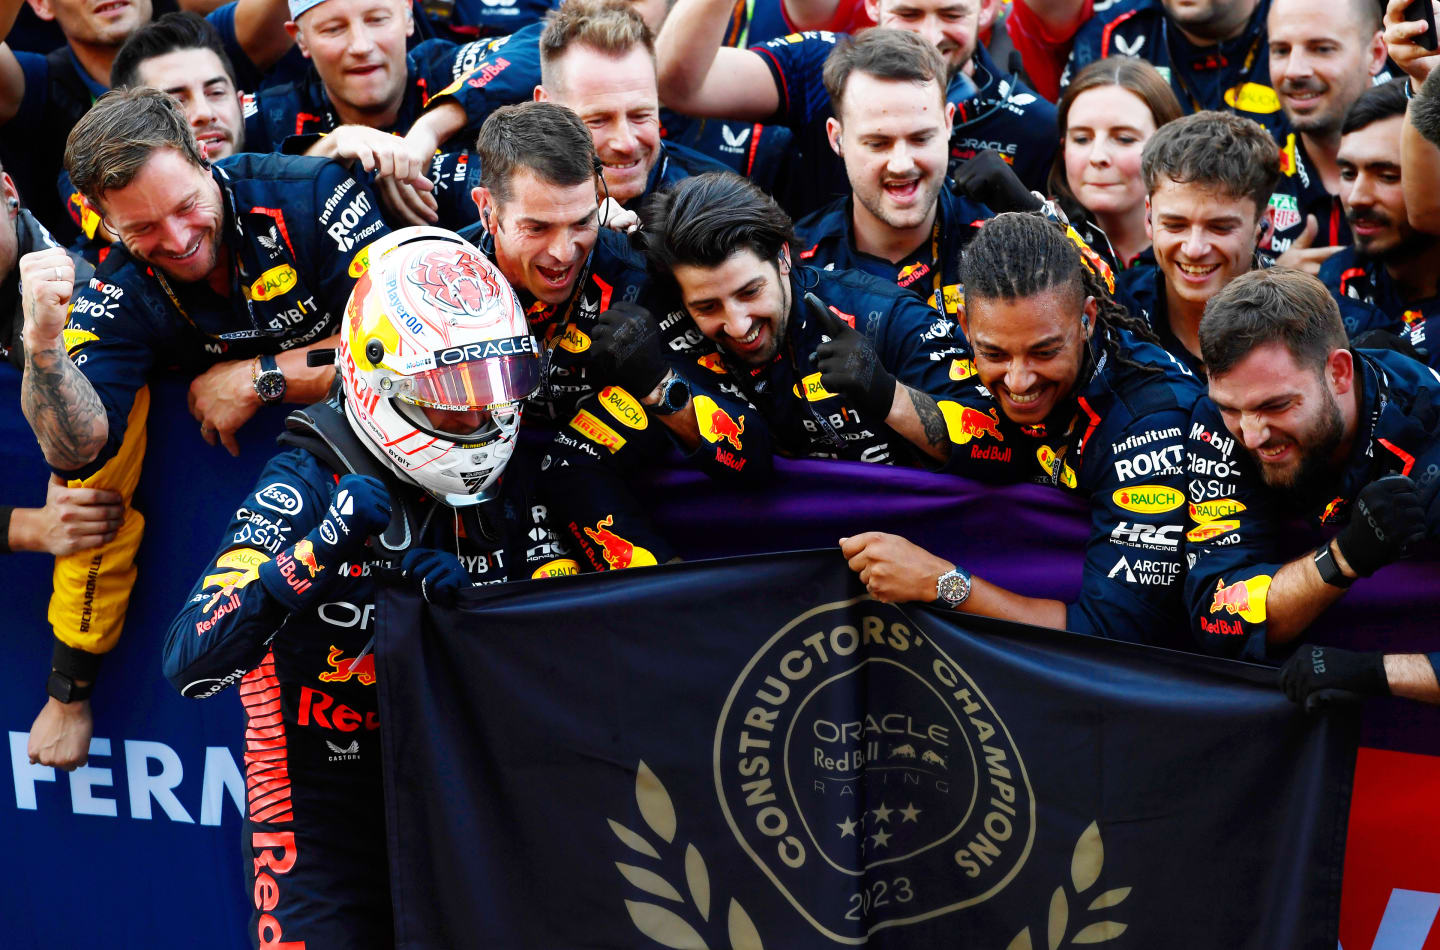 SUZUKA, JAPAN - SEPTEMBER 24: Race winner Max Verstappen of the Netherlands and Oracle Red Bull Racing and his team celebrate their Constructors' Championship win in parc ferme during the F1 Grand Prix of Japan at Suzuka International Racing Course on September 24, 2023 in Suzuka, Japan. (Photo by Rudy Carezzevoli/Getty Images)